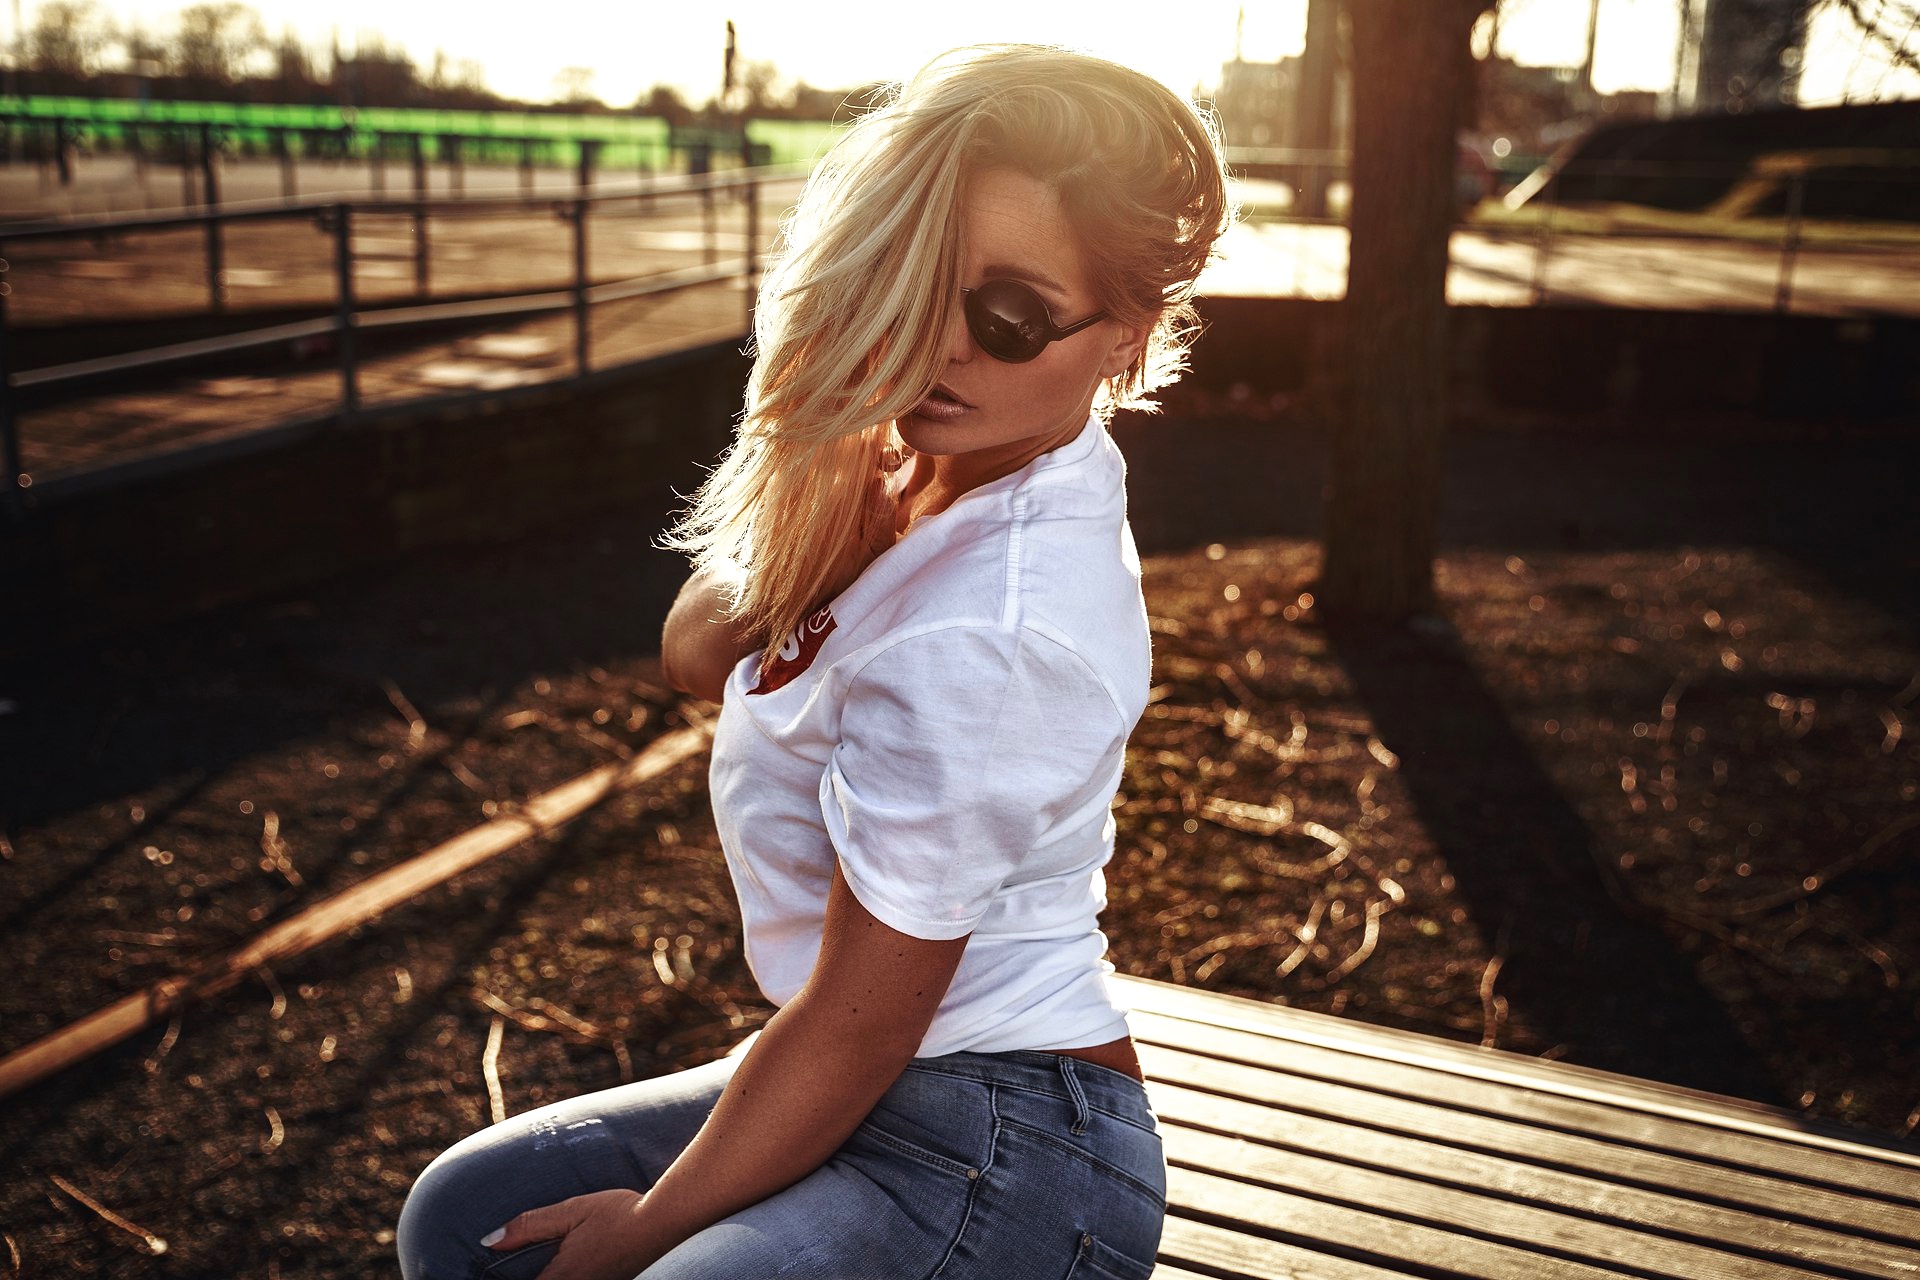 Alex Siracusano Model Women Blonde Sunglasses Women With Shades Shirt White Shirt Jeans Sitting Outd 1920x1280